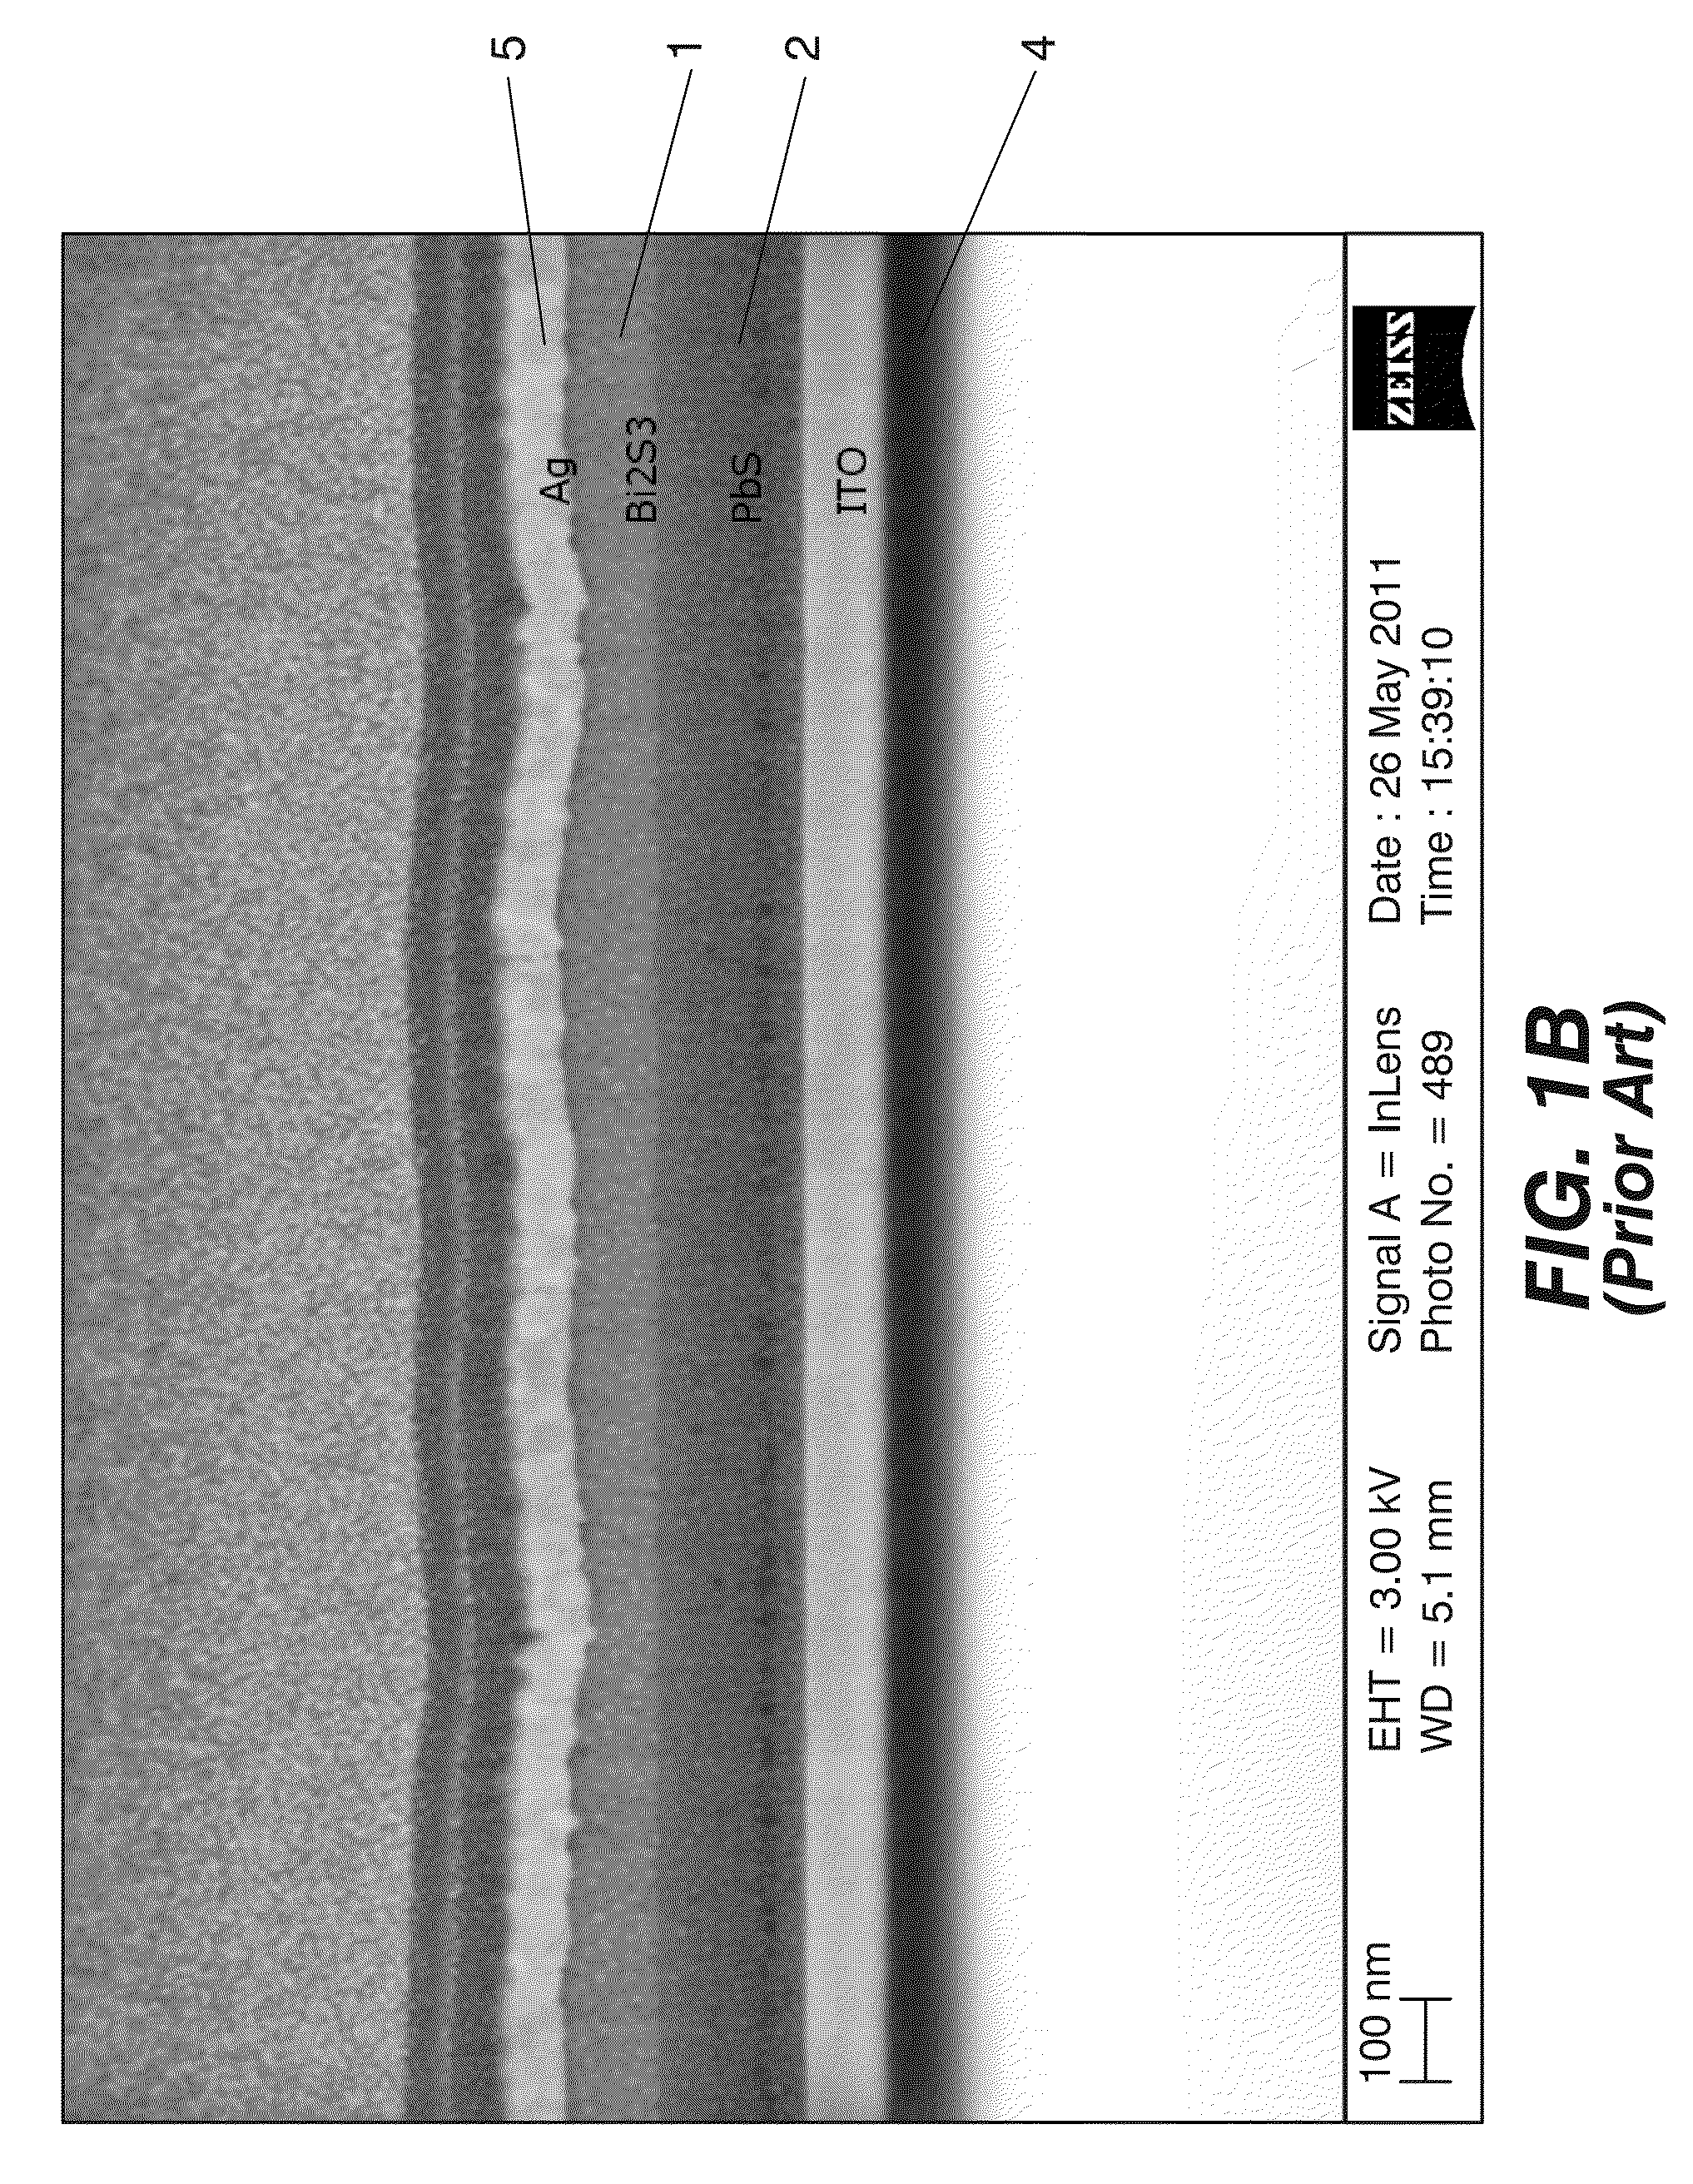 Photovoltaic nanocomposite comprising solution processed inorganic bulk nano-heterojunctions, solar cell and photodiode devices comprising the nanocomposite